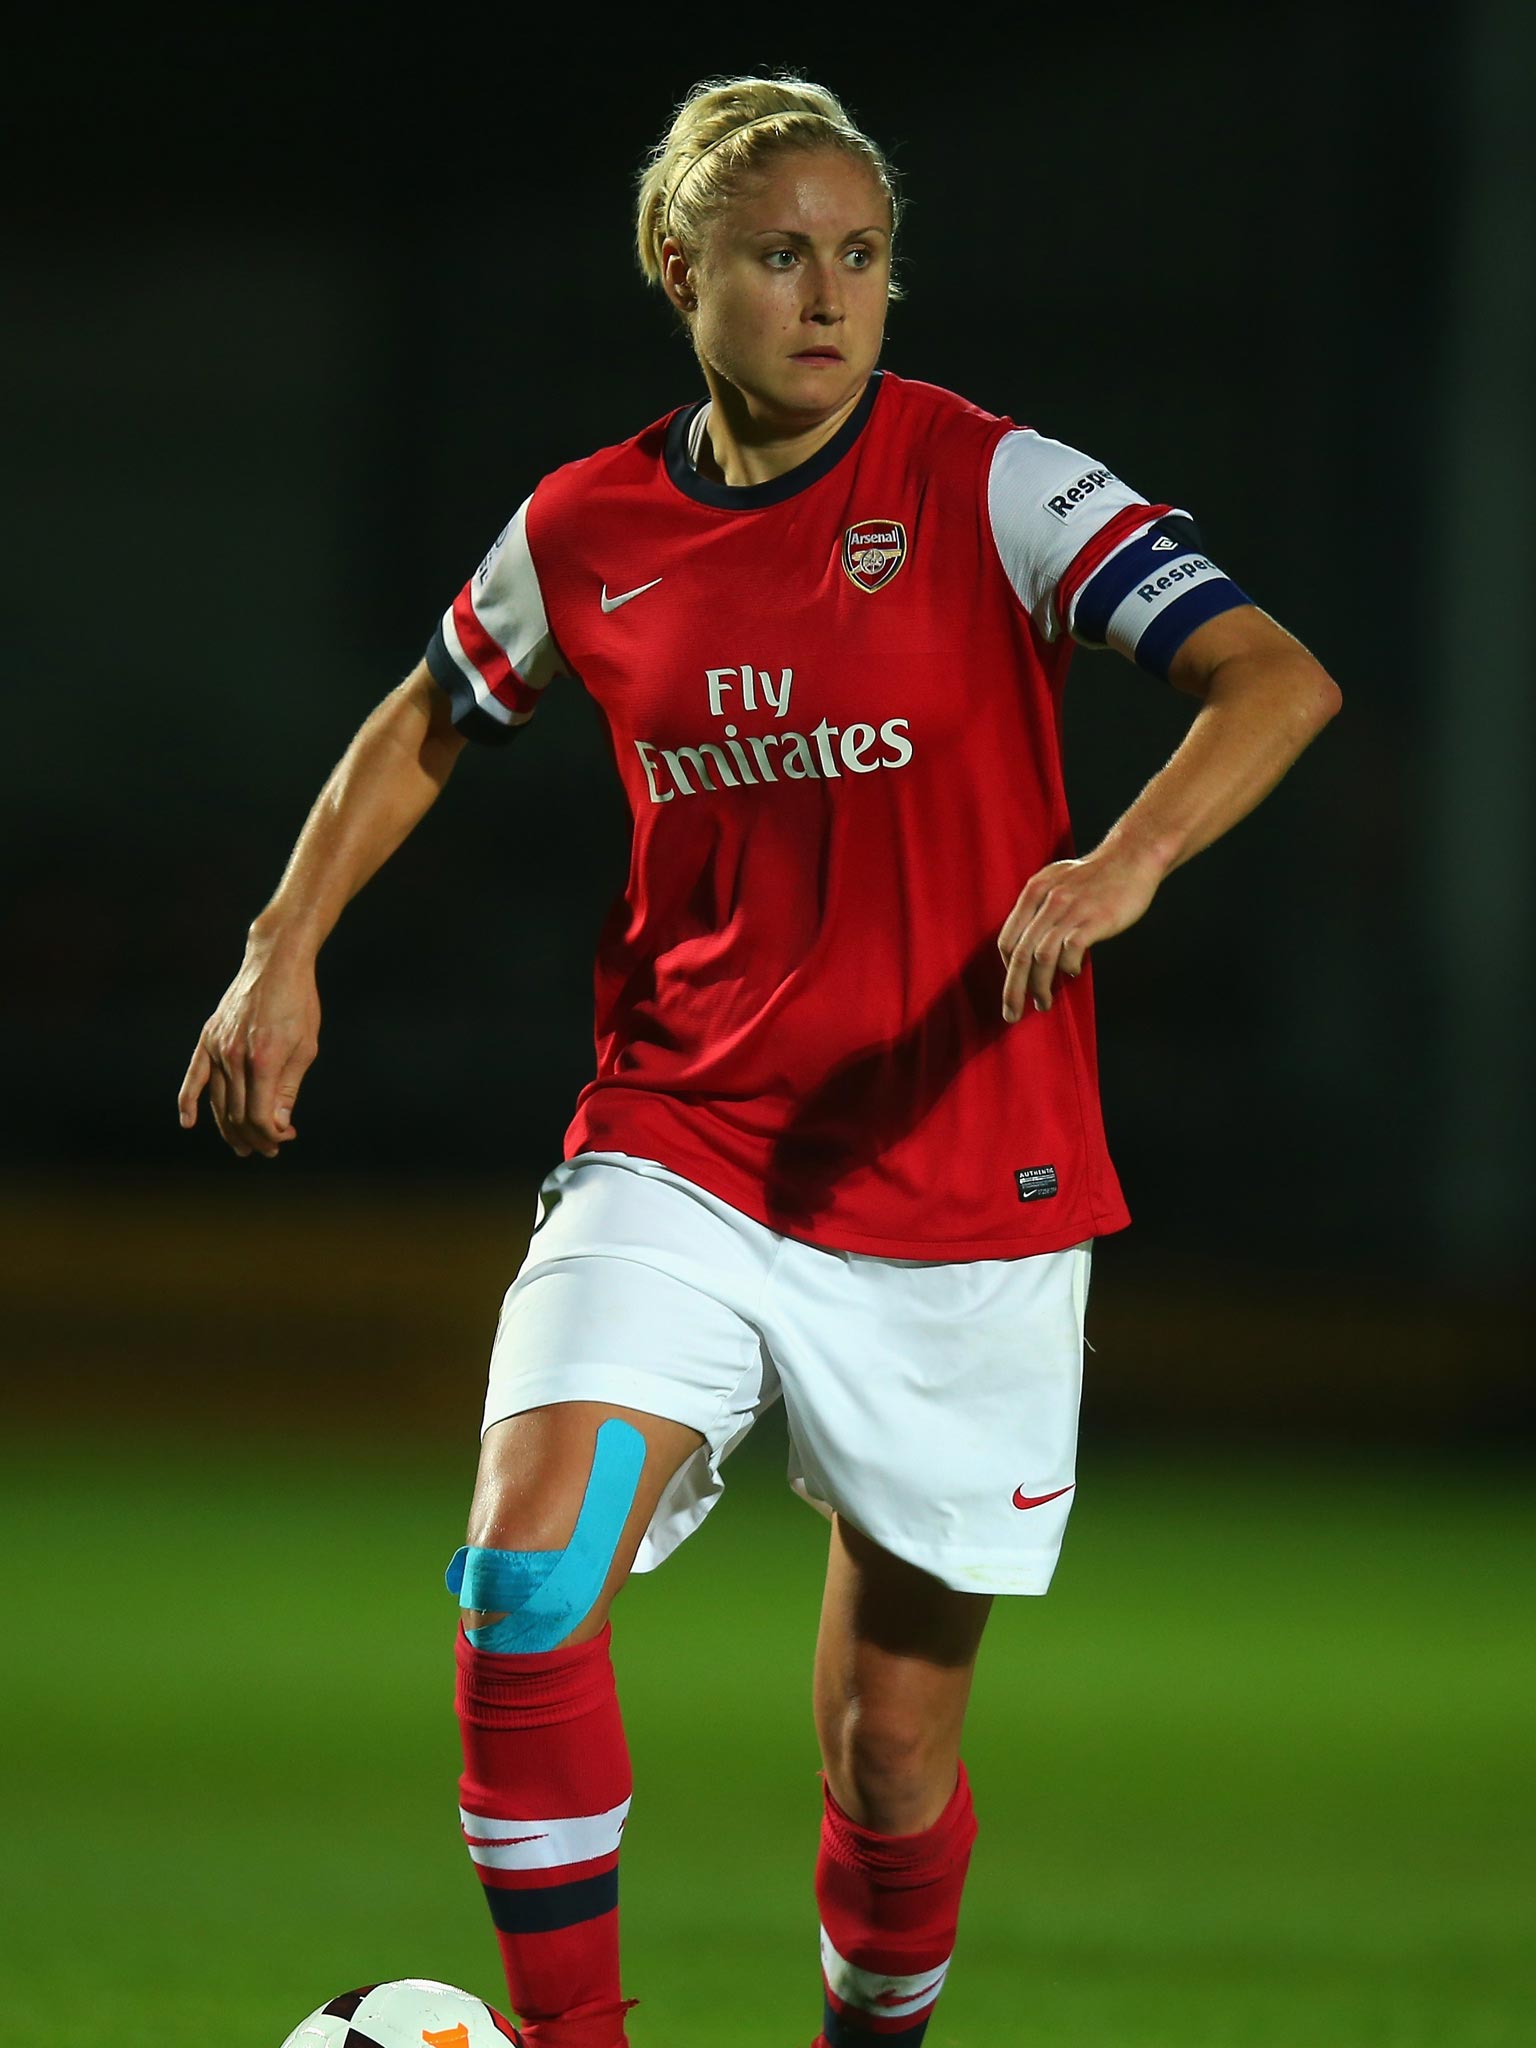 Steph Houghton has been named permanent captain after standing in for Casey Stoney